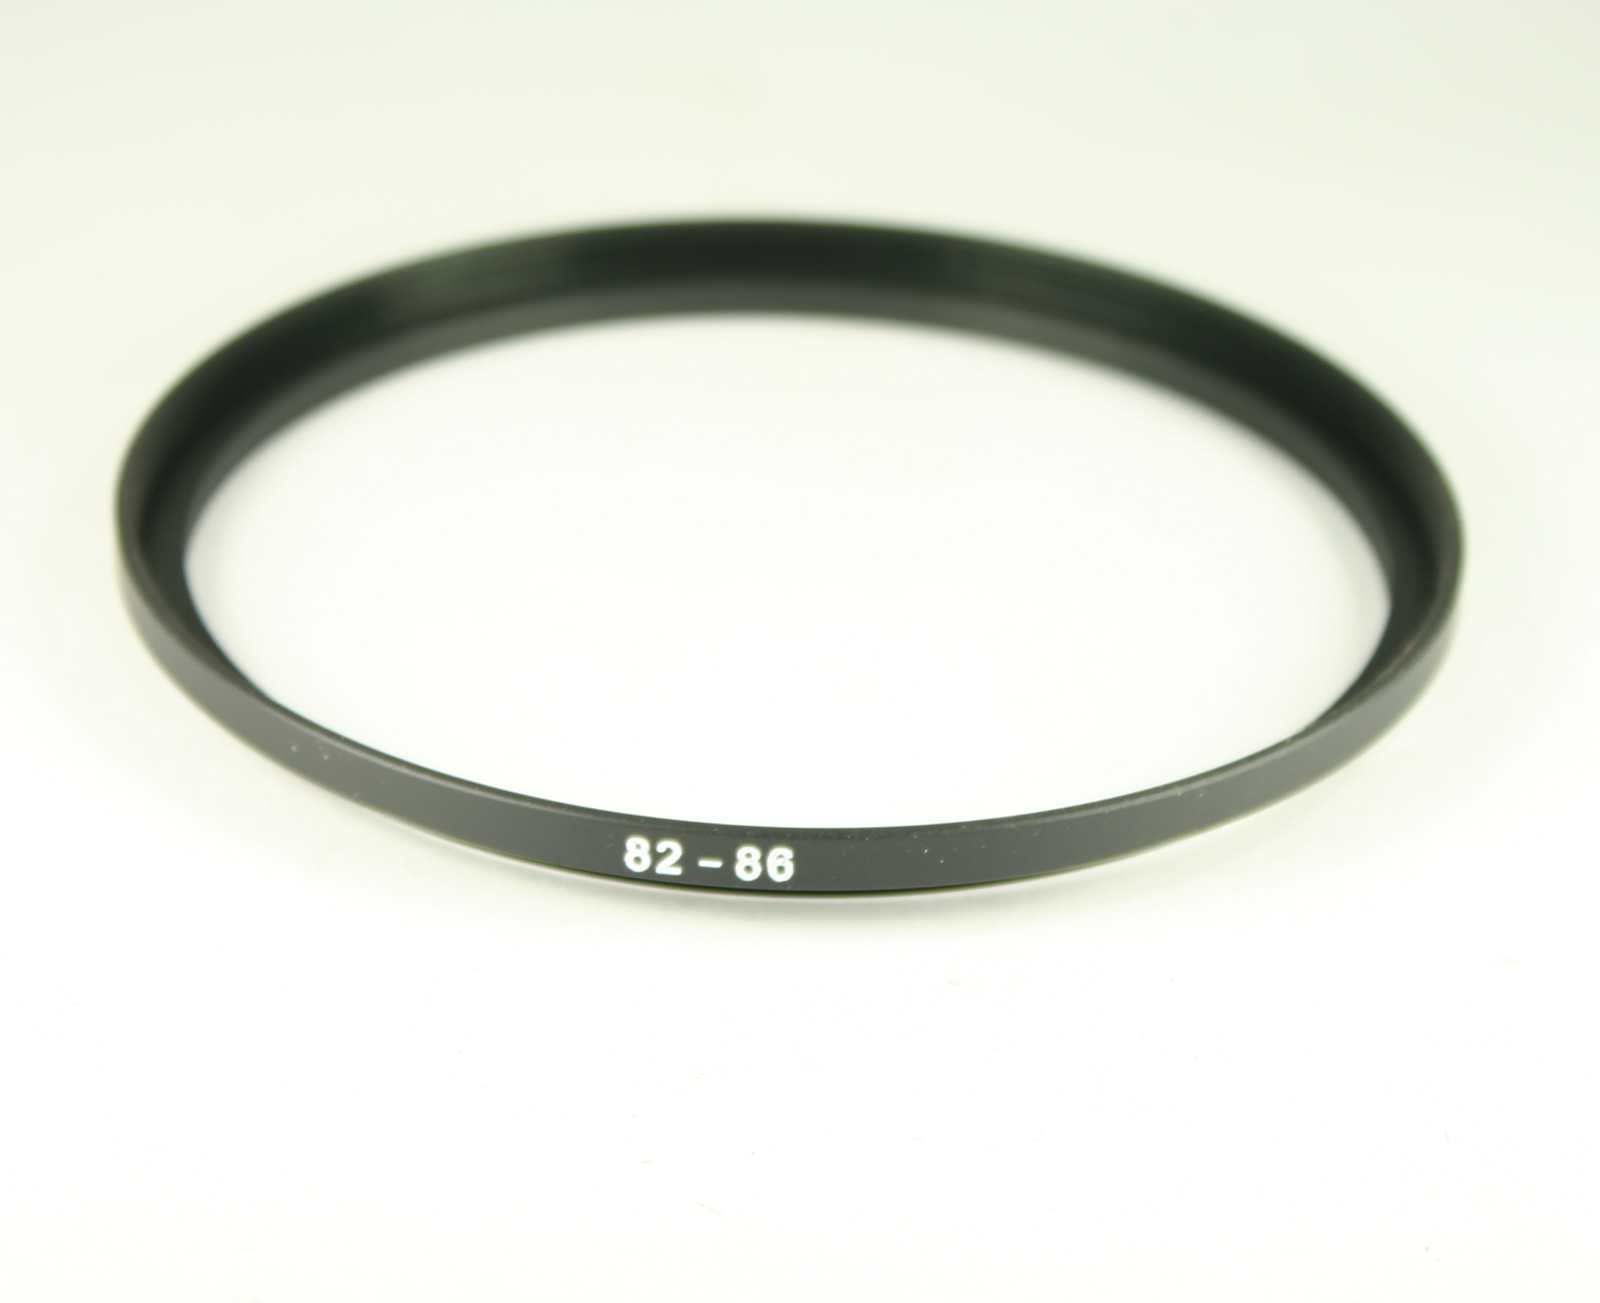 Step Up Ring 82-86mm